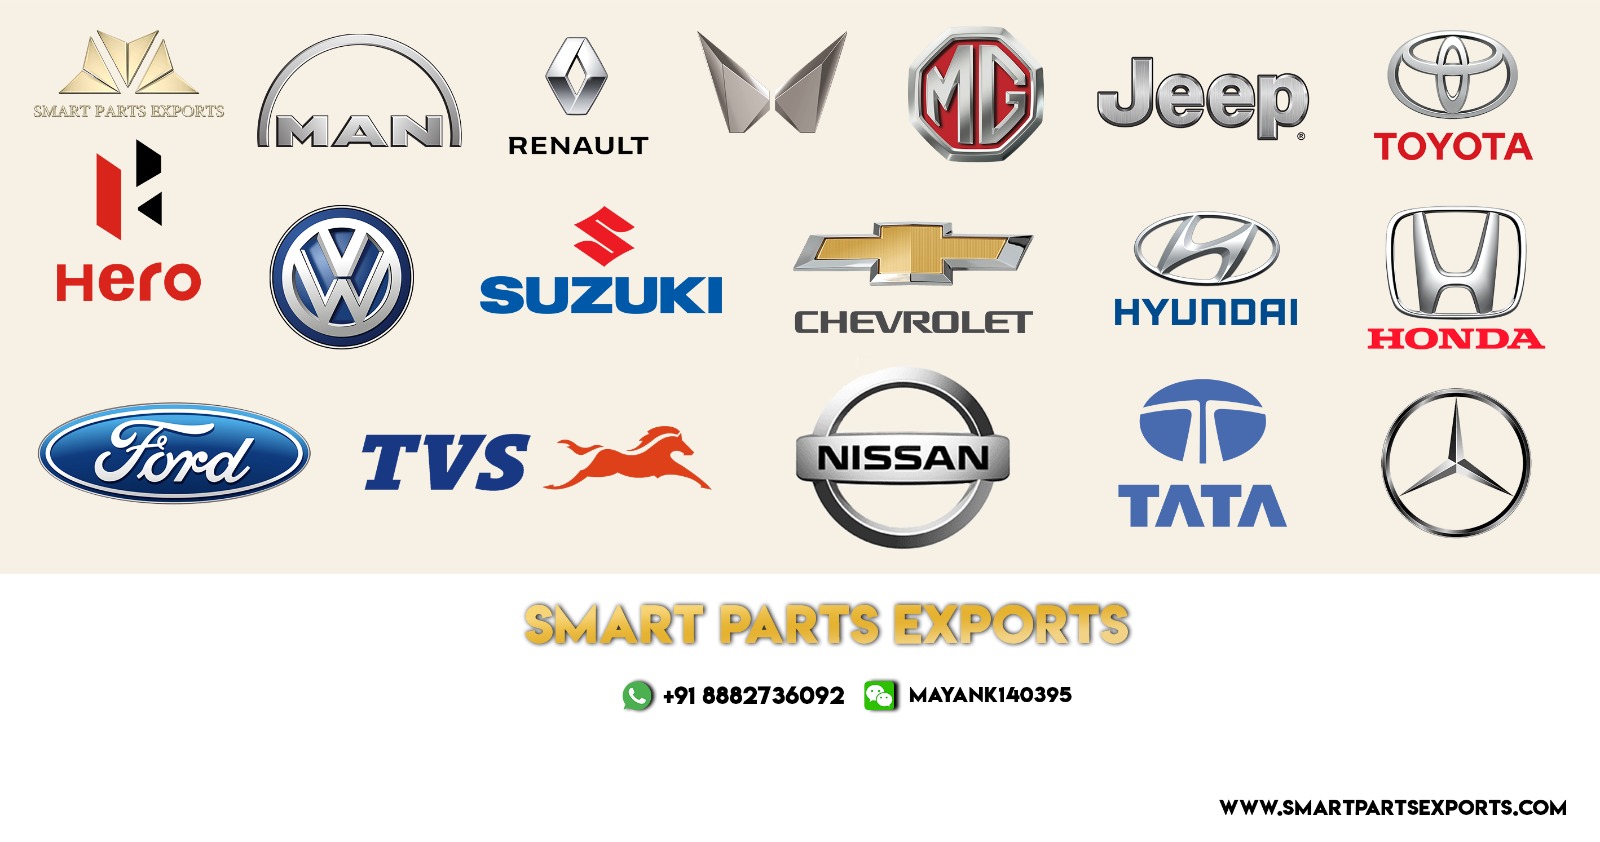 Smart Parts Exports is the Largest spare parts exporter